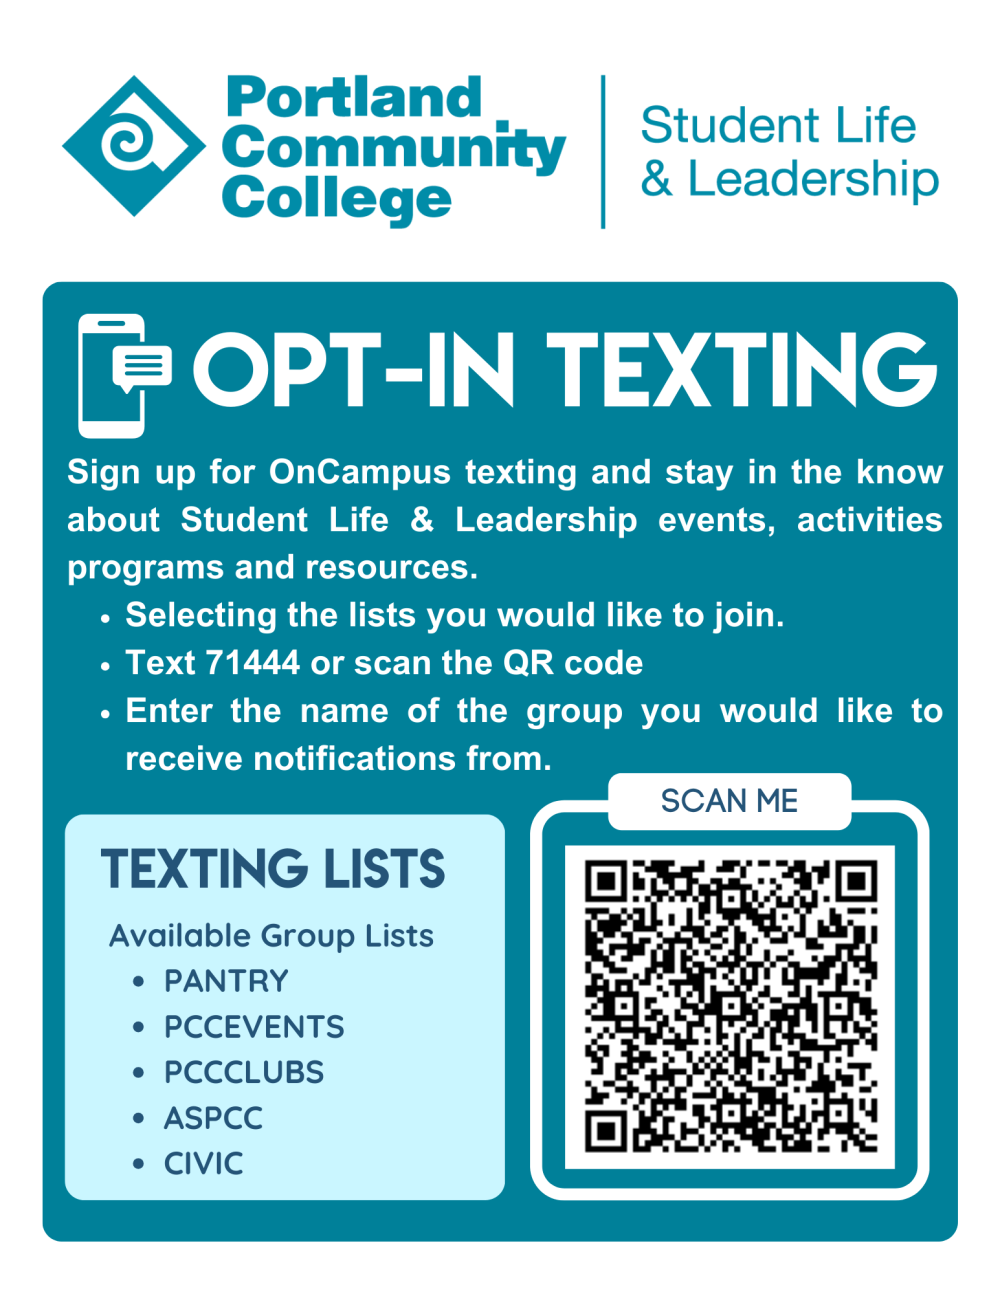 Opt-in texting